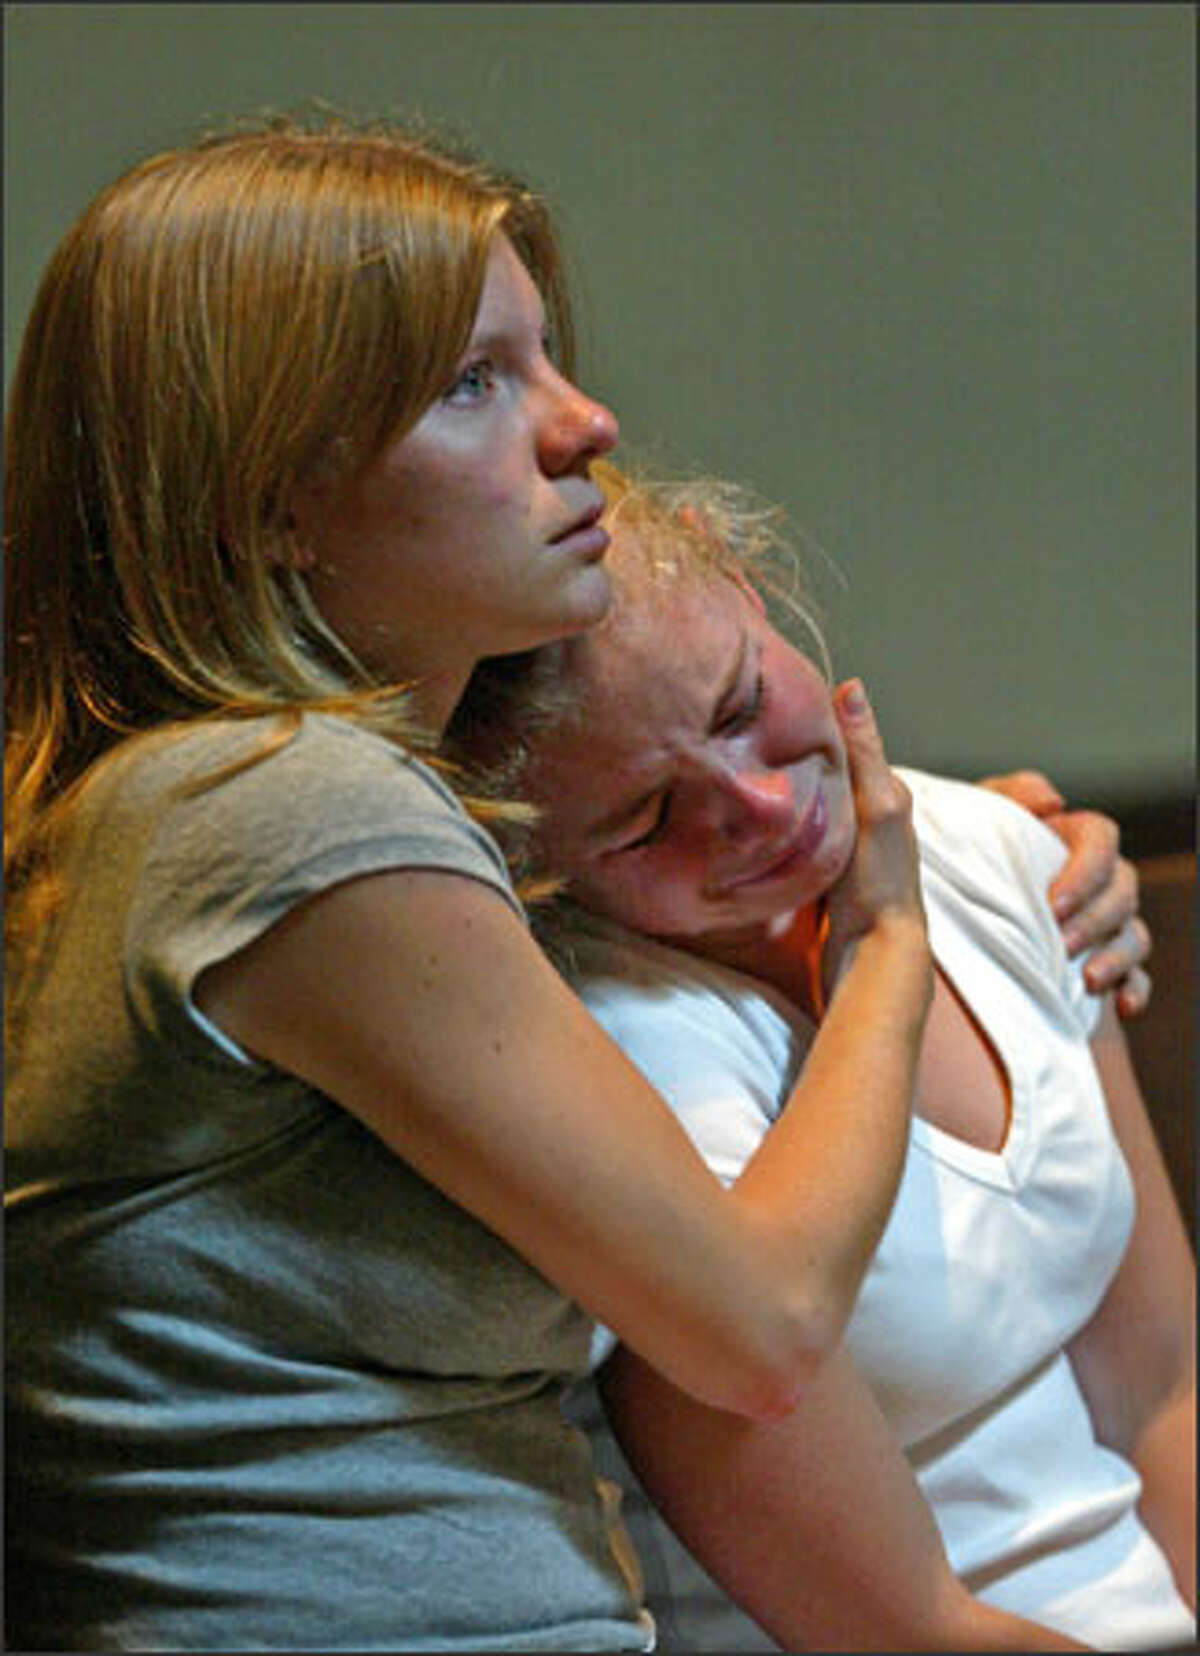 During a mass at St. James Cathedral, 21-year-old Sarah Estill, left, comforts her 17-year-old sister, Jenny, both of Seattle. They were affected by the prayers for the victims of the July 7 bombings in London, which killed more than 50 people. Sarah, recently returned from England, said she was glad it wasn't bigger, while Jenny remarked, "THis stupid war."